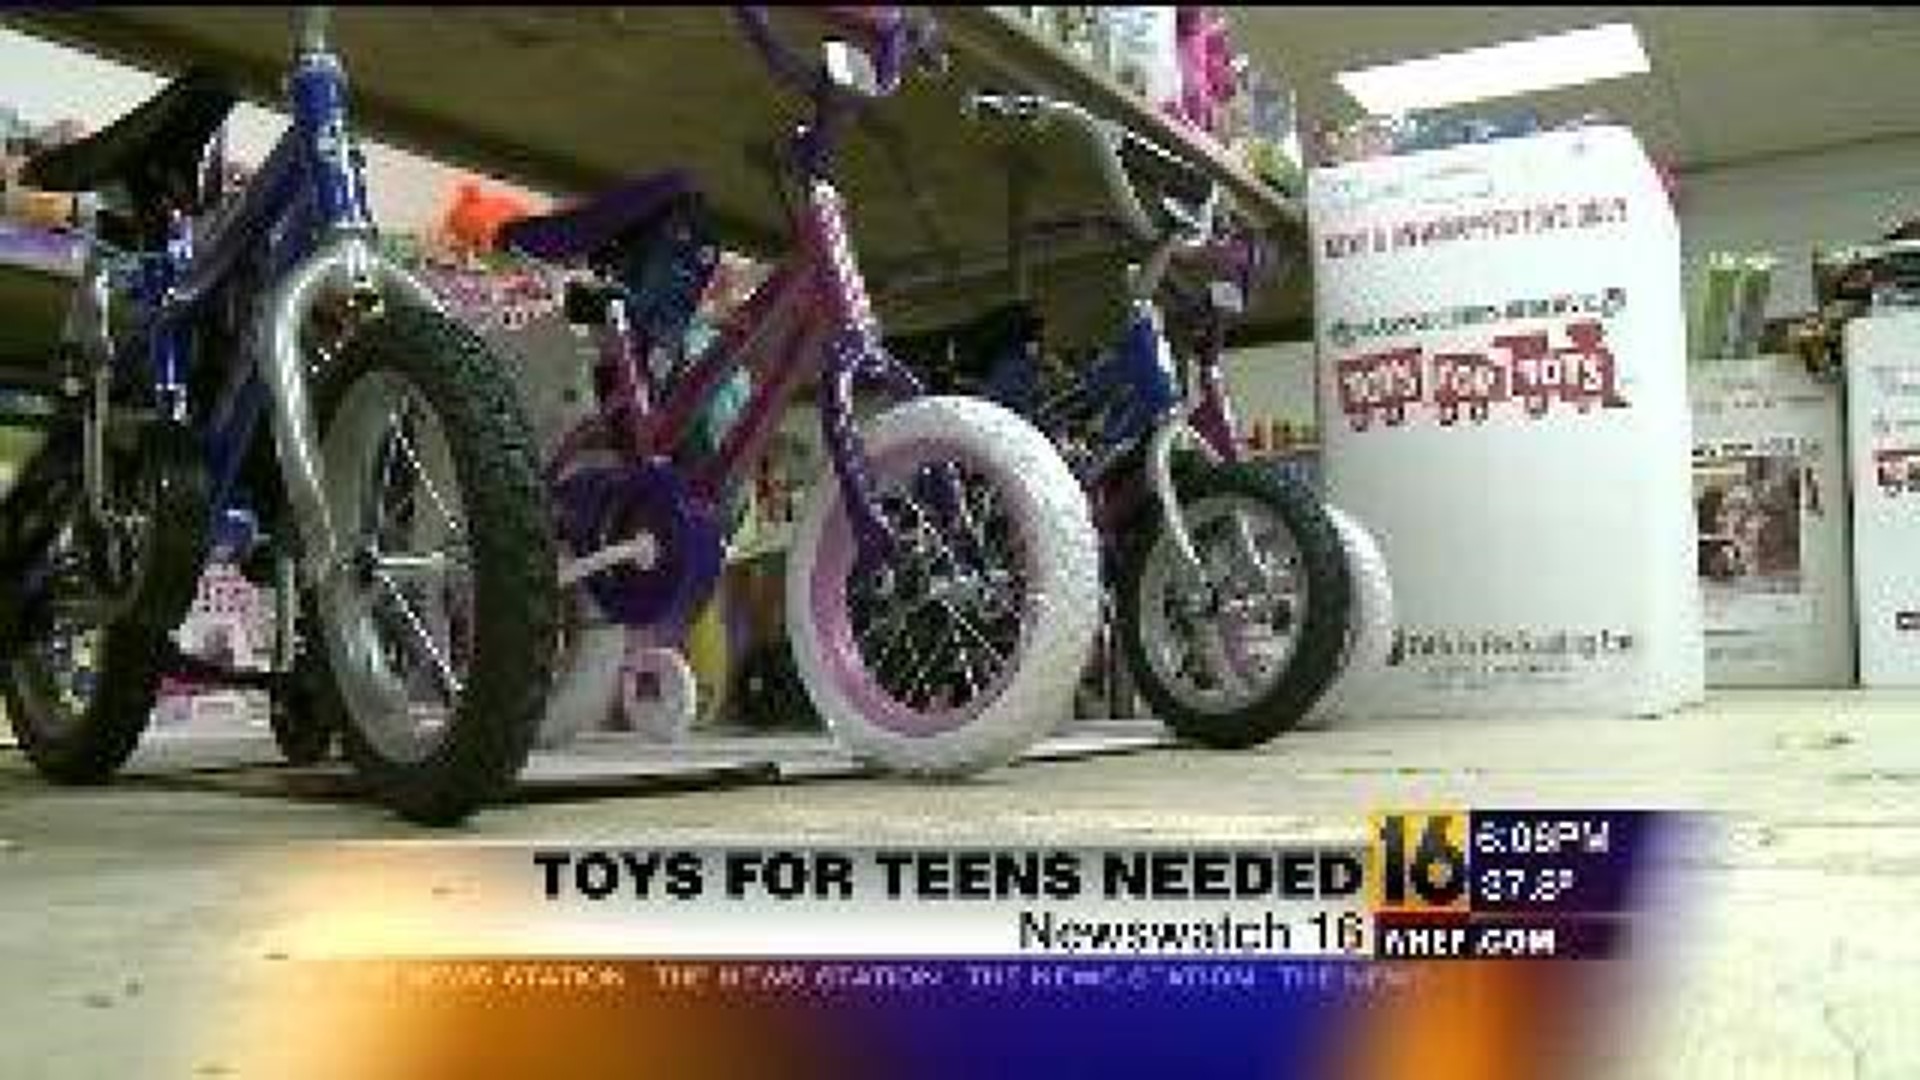 Toys for Tots Need Teen Toys